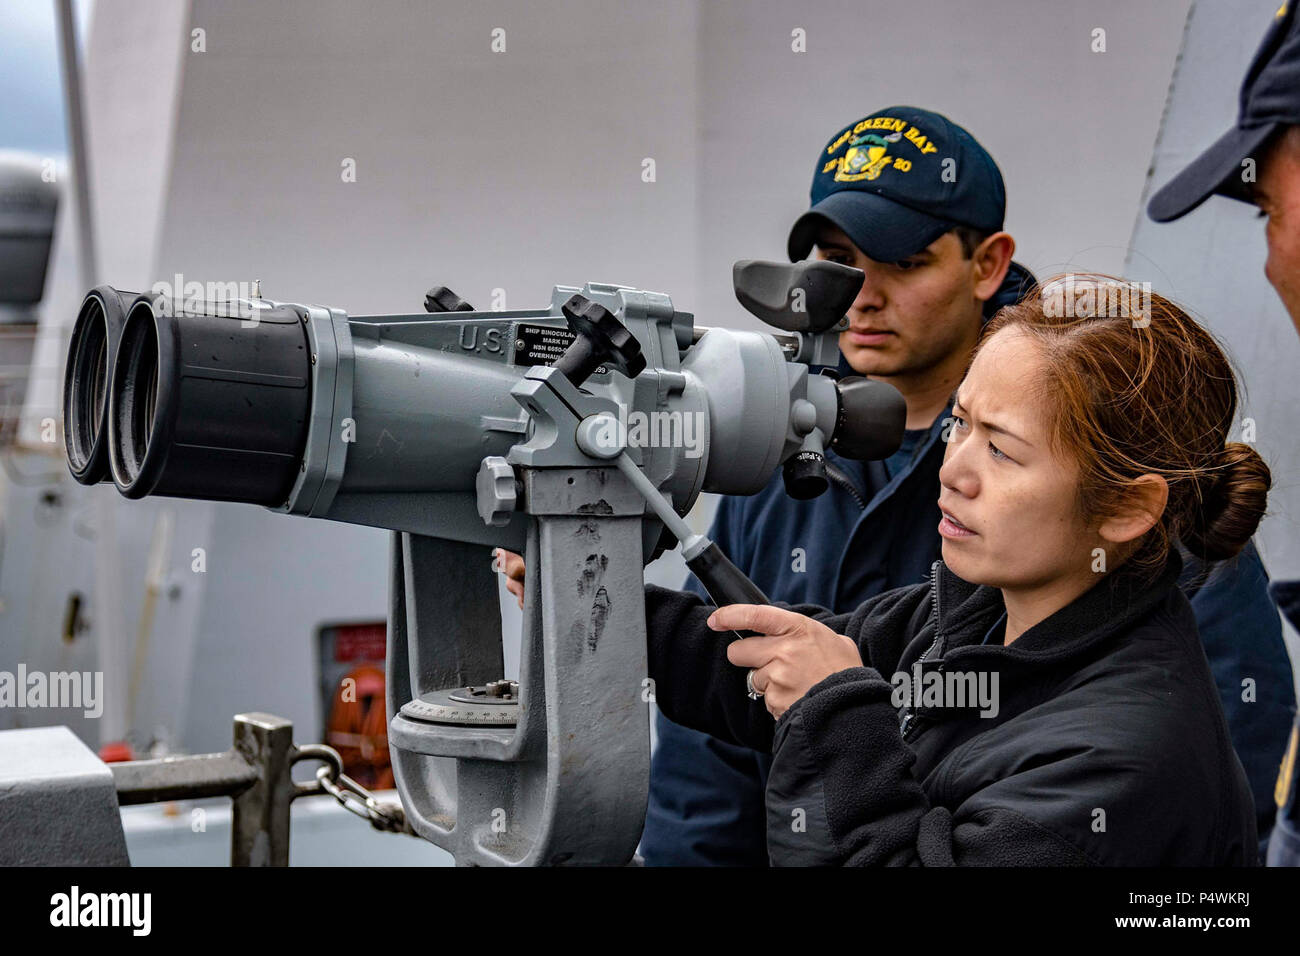 SEA OF JAPAN (May 10, 2017) Senior Chief Quartermaster Donna Baraoidan, from Commander, Naval Surface Forces Type Commander Material Inspection Team, inspects binoculars aboard the amphibious transport dock USS Green Bay (LPD 20) during the ship’s Mid-Cycle Inspection (MCI). Green Bay, assigned to Commander, Amphibious Squadron 11, is conducting its MCI, which is conducted at the mid-year point prior to the Board of Inspection and Survey (INSURV) and is used to inspect and assess the material conditions of a ship. Stock Photo